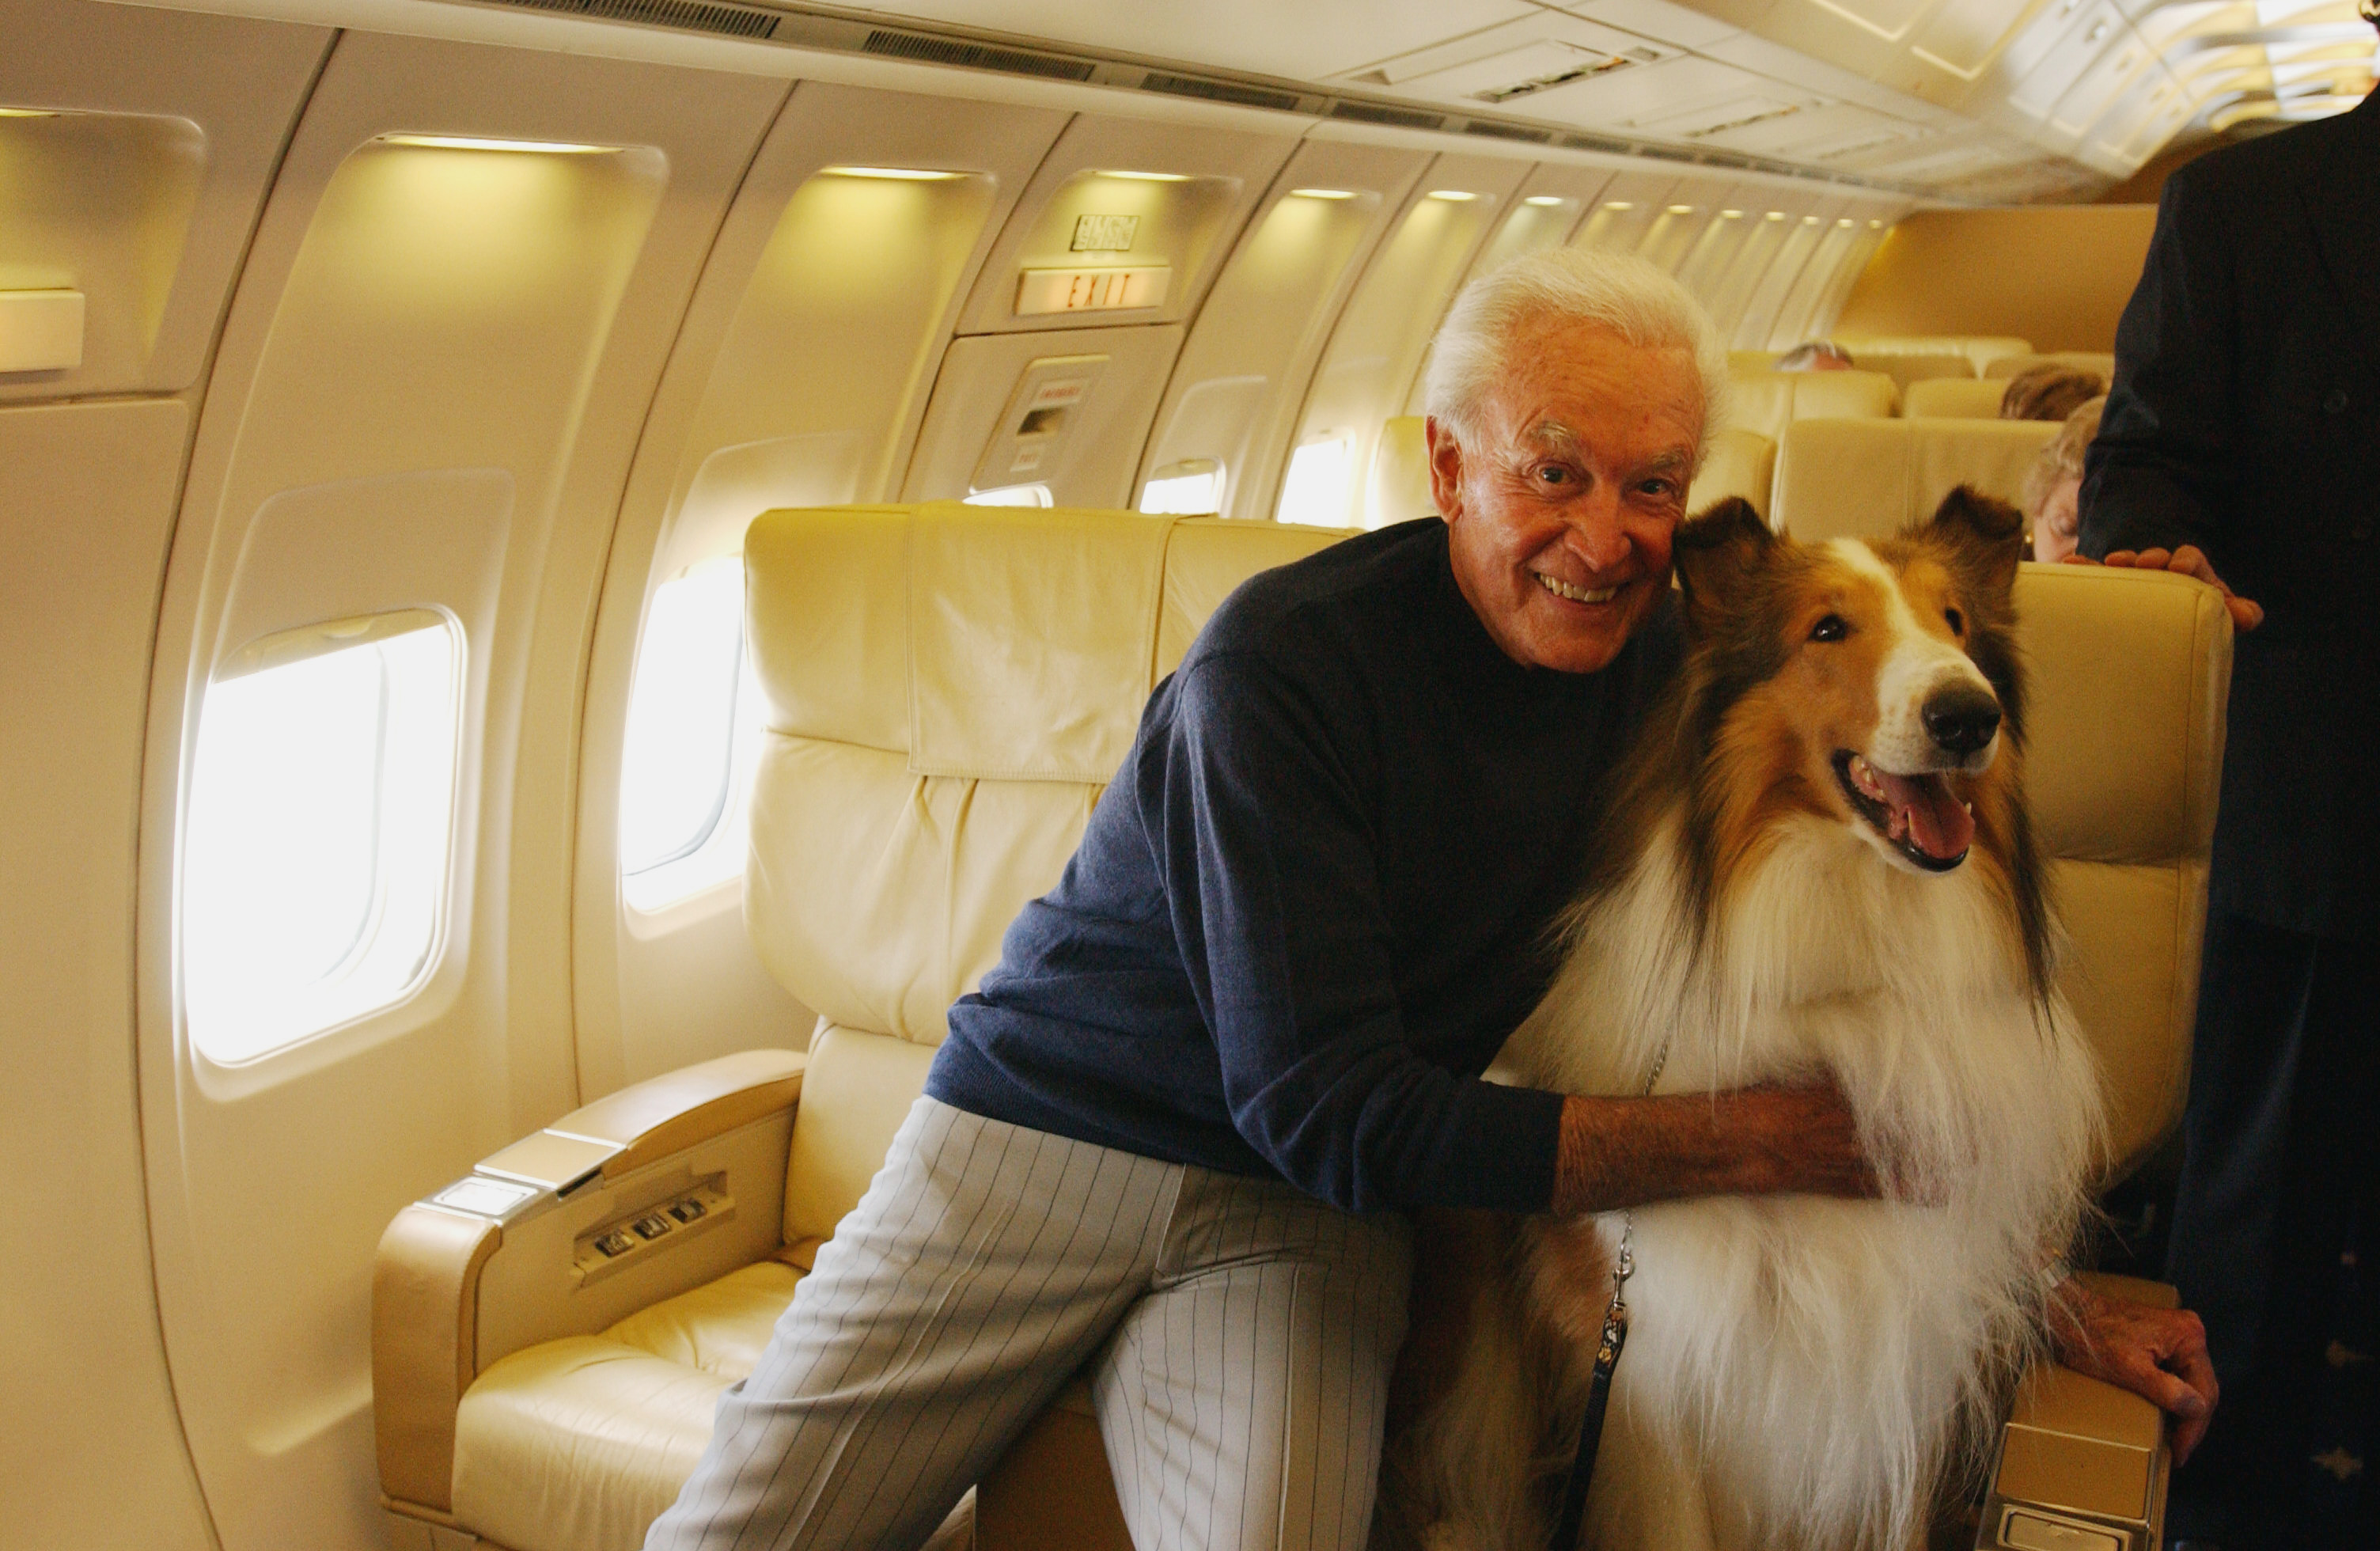 Howard, best known as Lassie, poses with American television personality and game show host Bob Barker on a chartered aircraft, Los Angeles, California, October 31, 2003. | Source: Getty Images